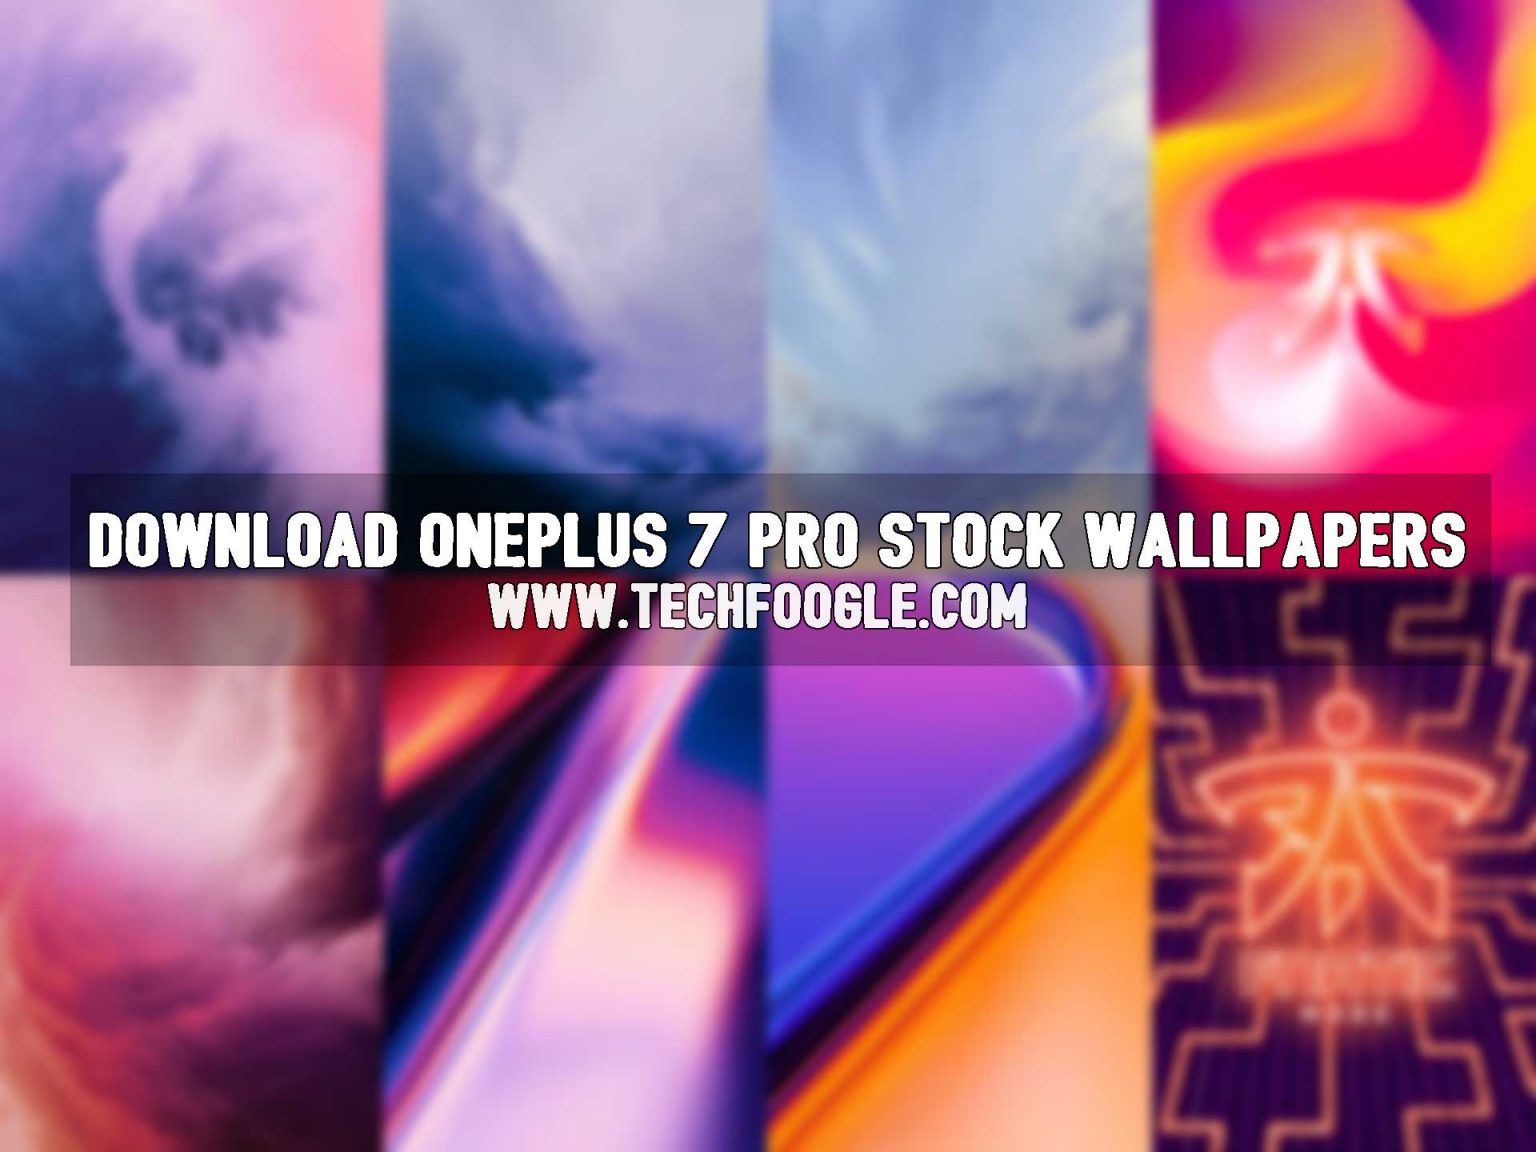 Free Download OnePlus 7 Pro Stock Wallpapers (4K)